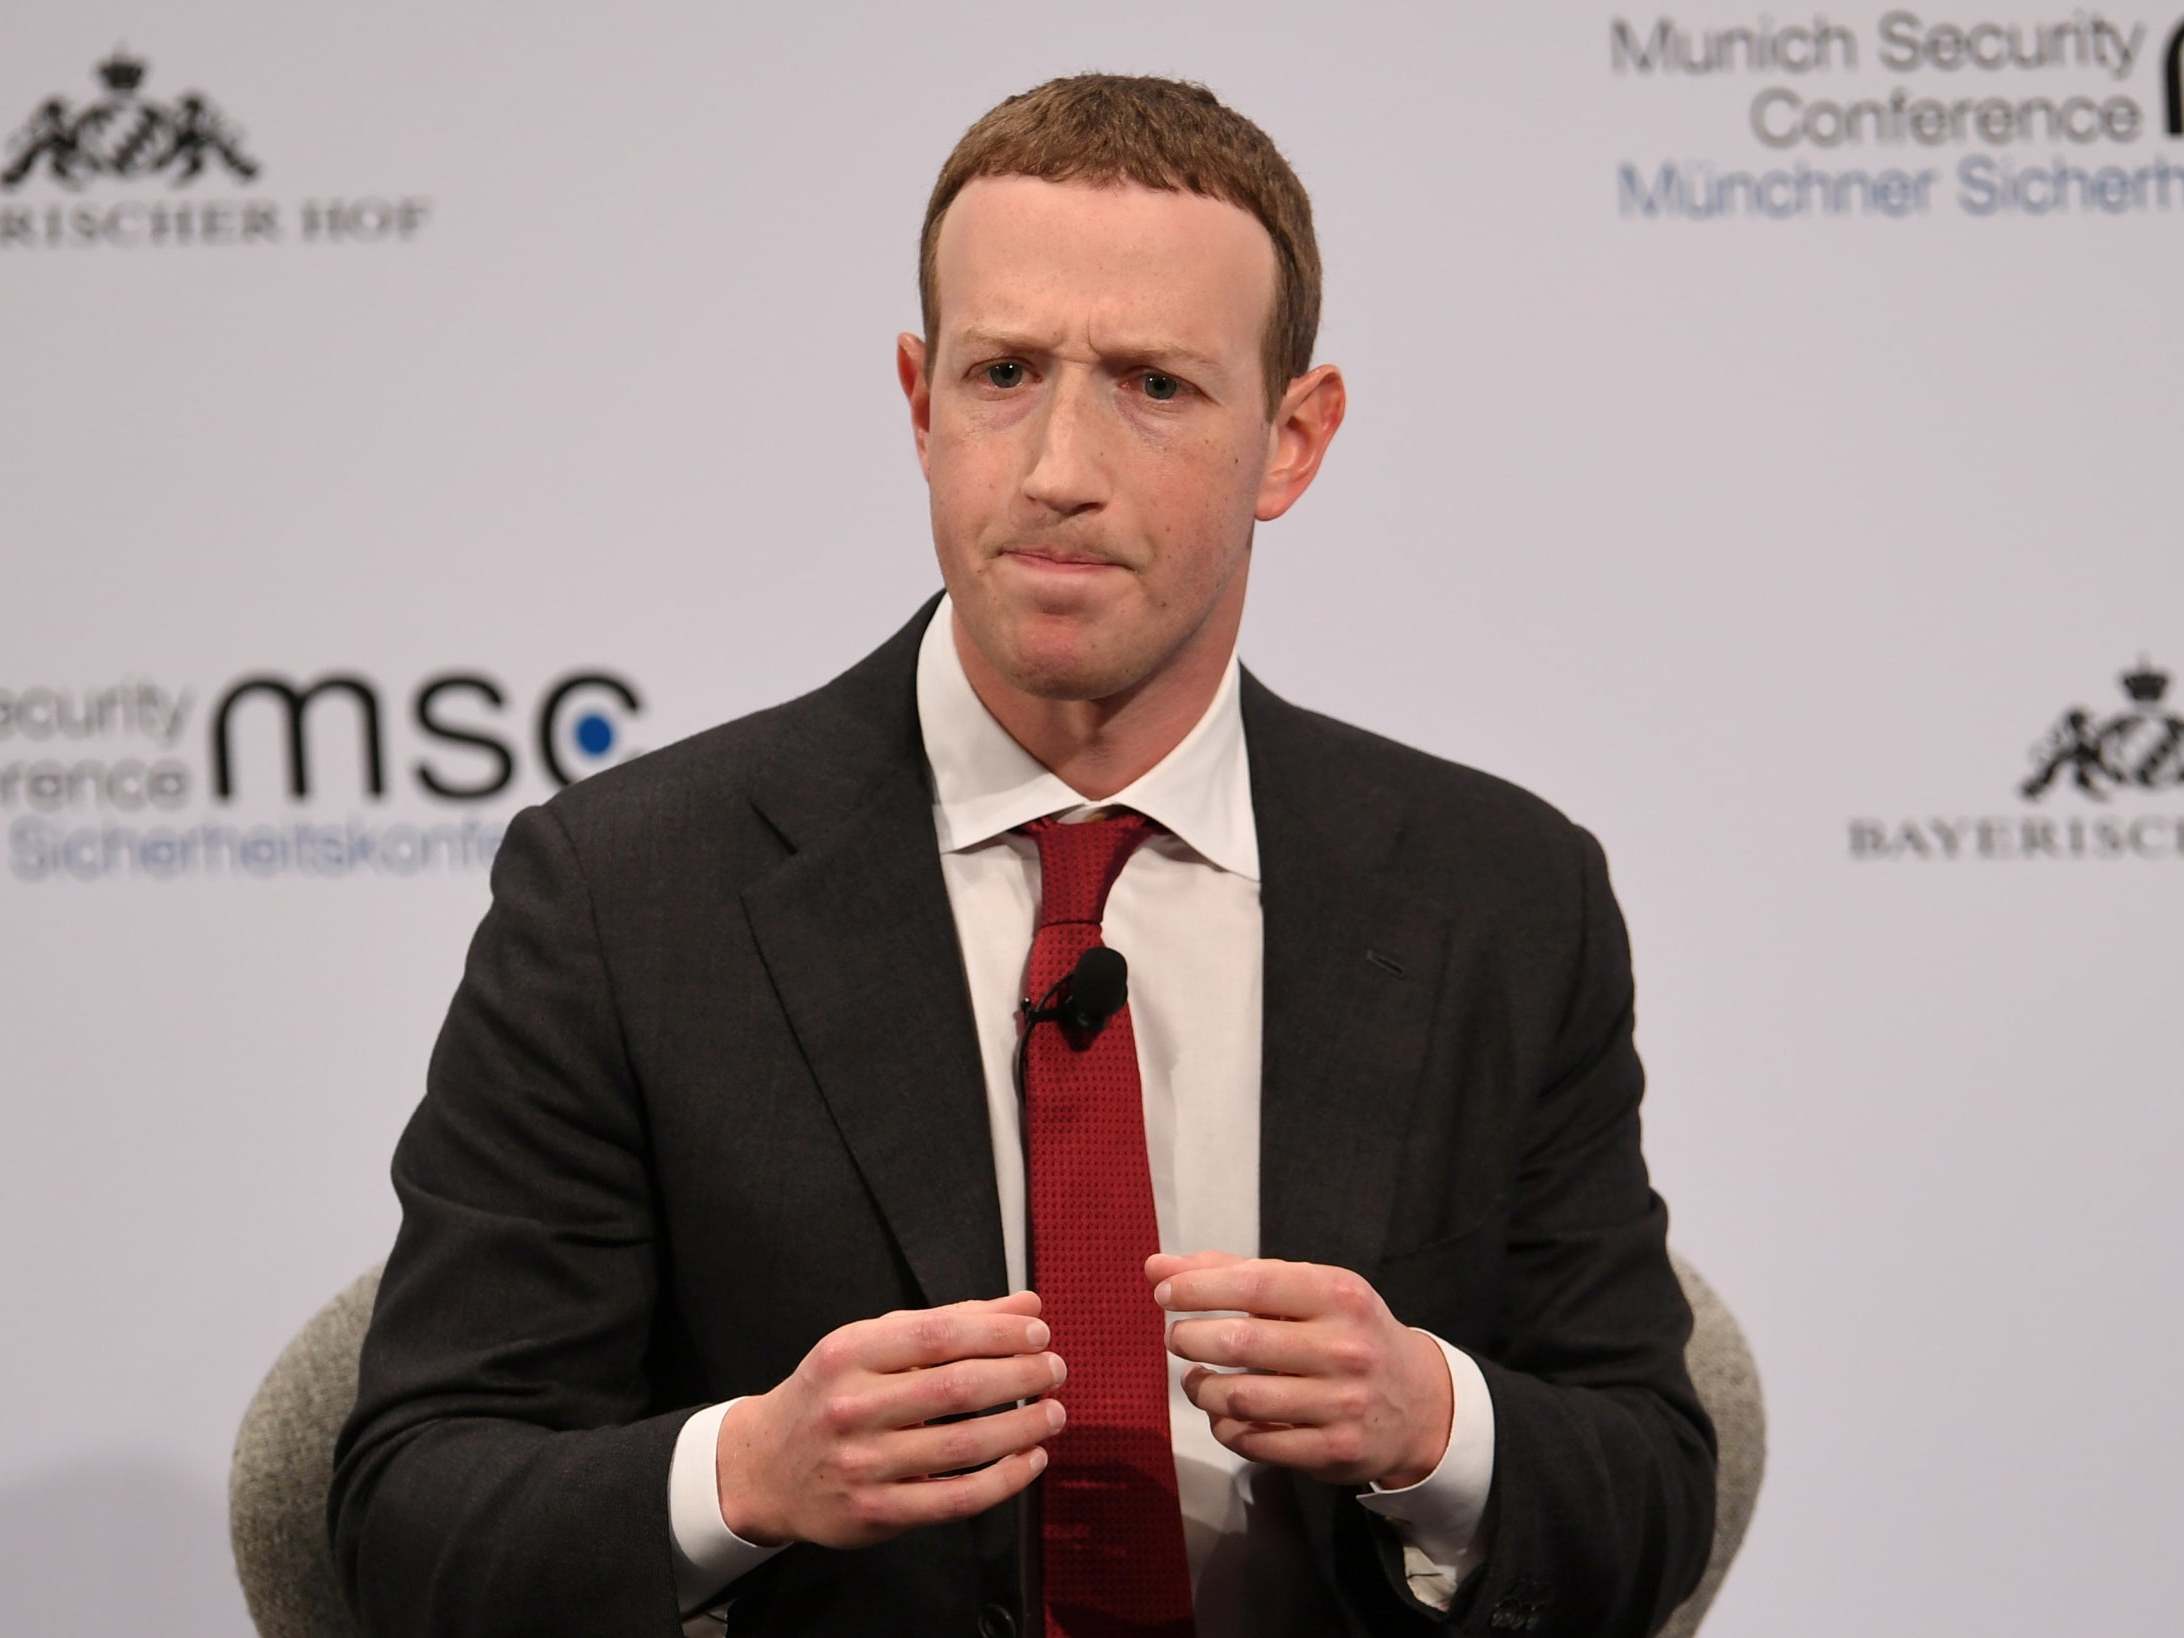 Facebook CEO Mark Zuckerberg speaks at the annual Munich Security Conference on 15 February 2020